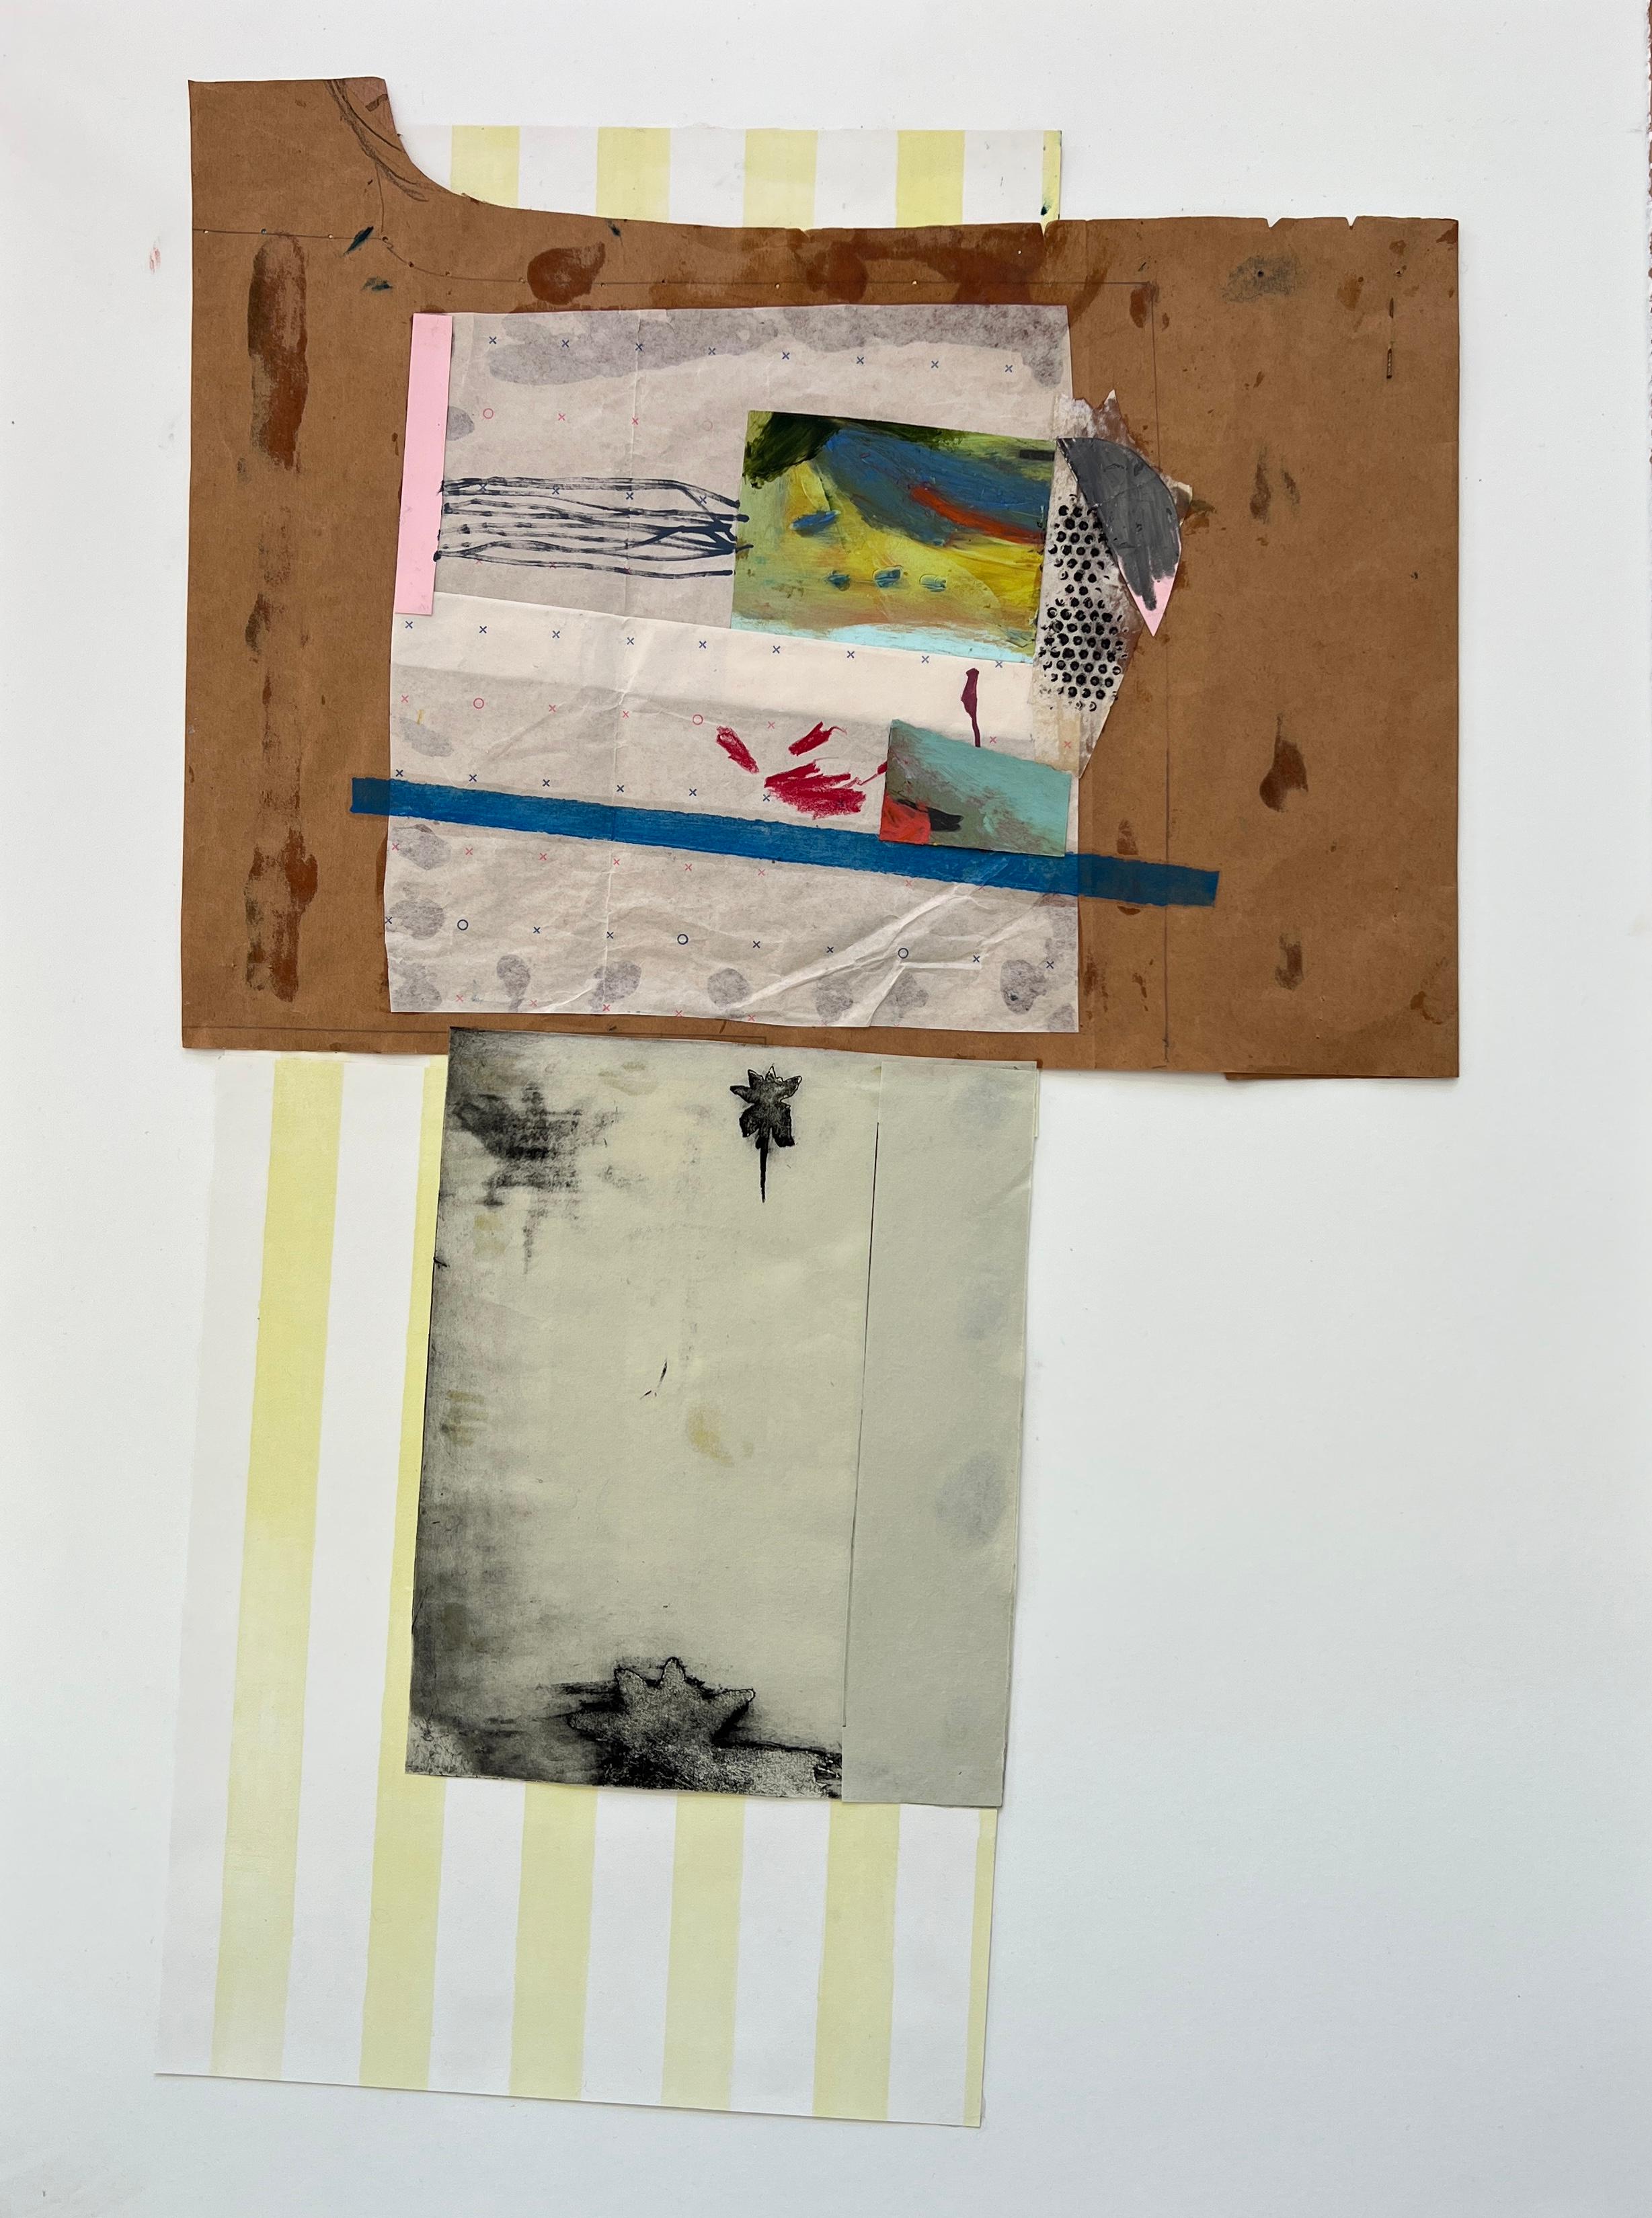 Montana Landscape, No. 2 From the Car: Collage on Paper, with Collaged drawings  - Mixed Media Art by Lisa Lightman